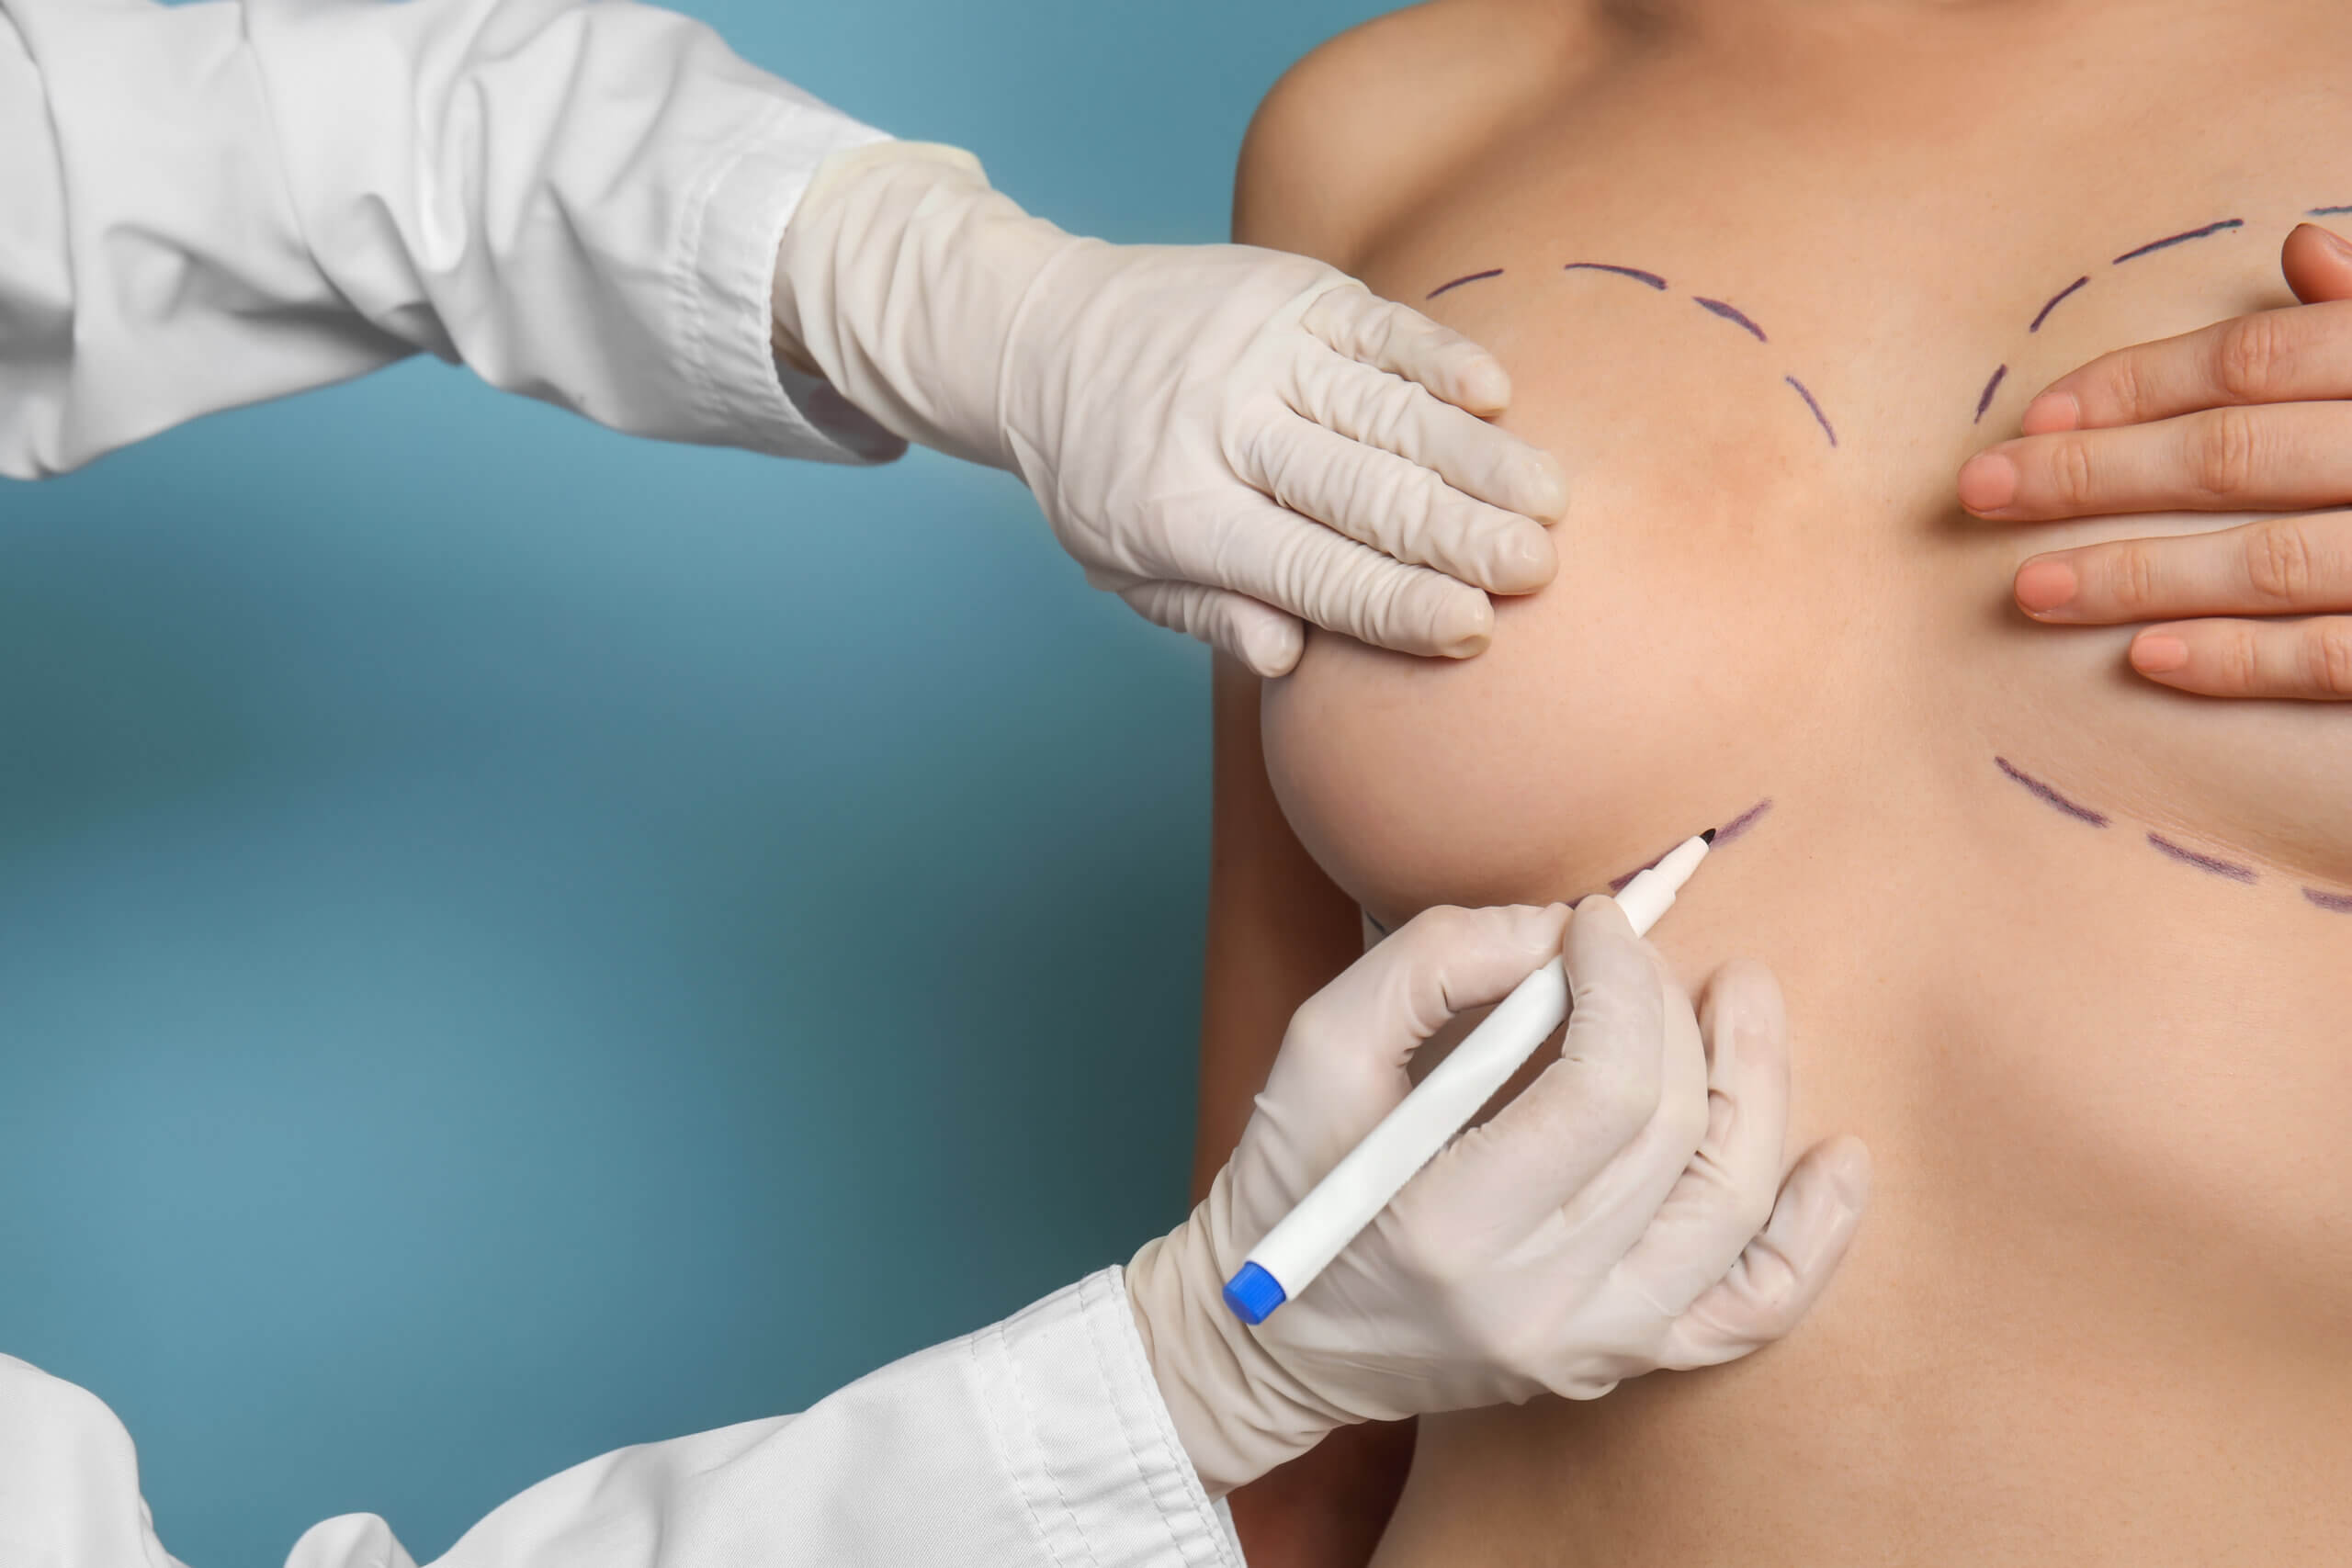 Breast Augmentation With Silicone or Saline: How To Choose?